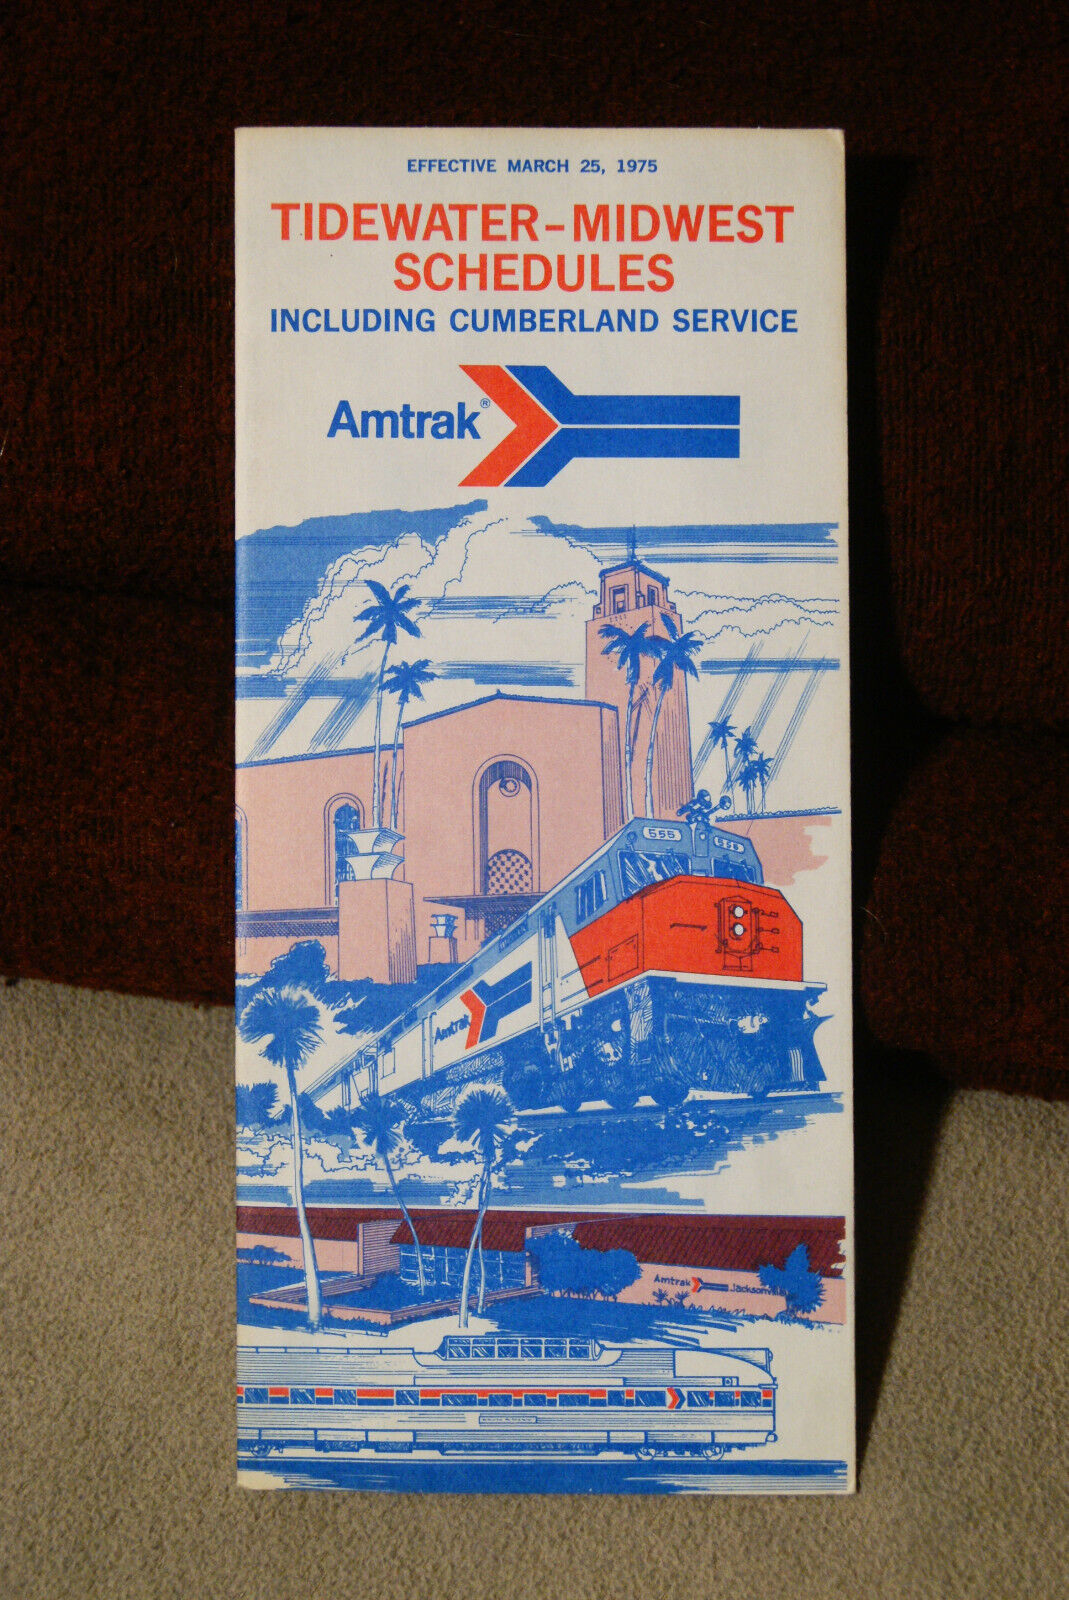 Amtrak - Tidewater - Midwest Timetable - March 25, 1975